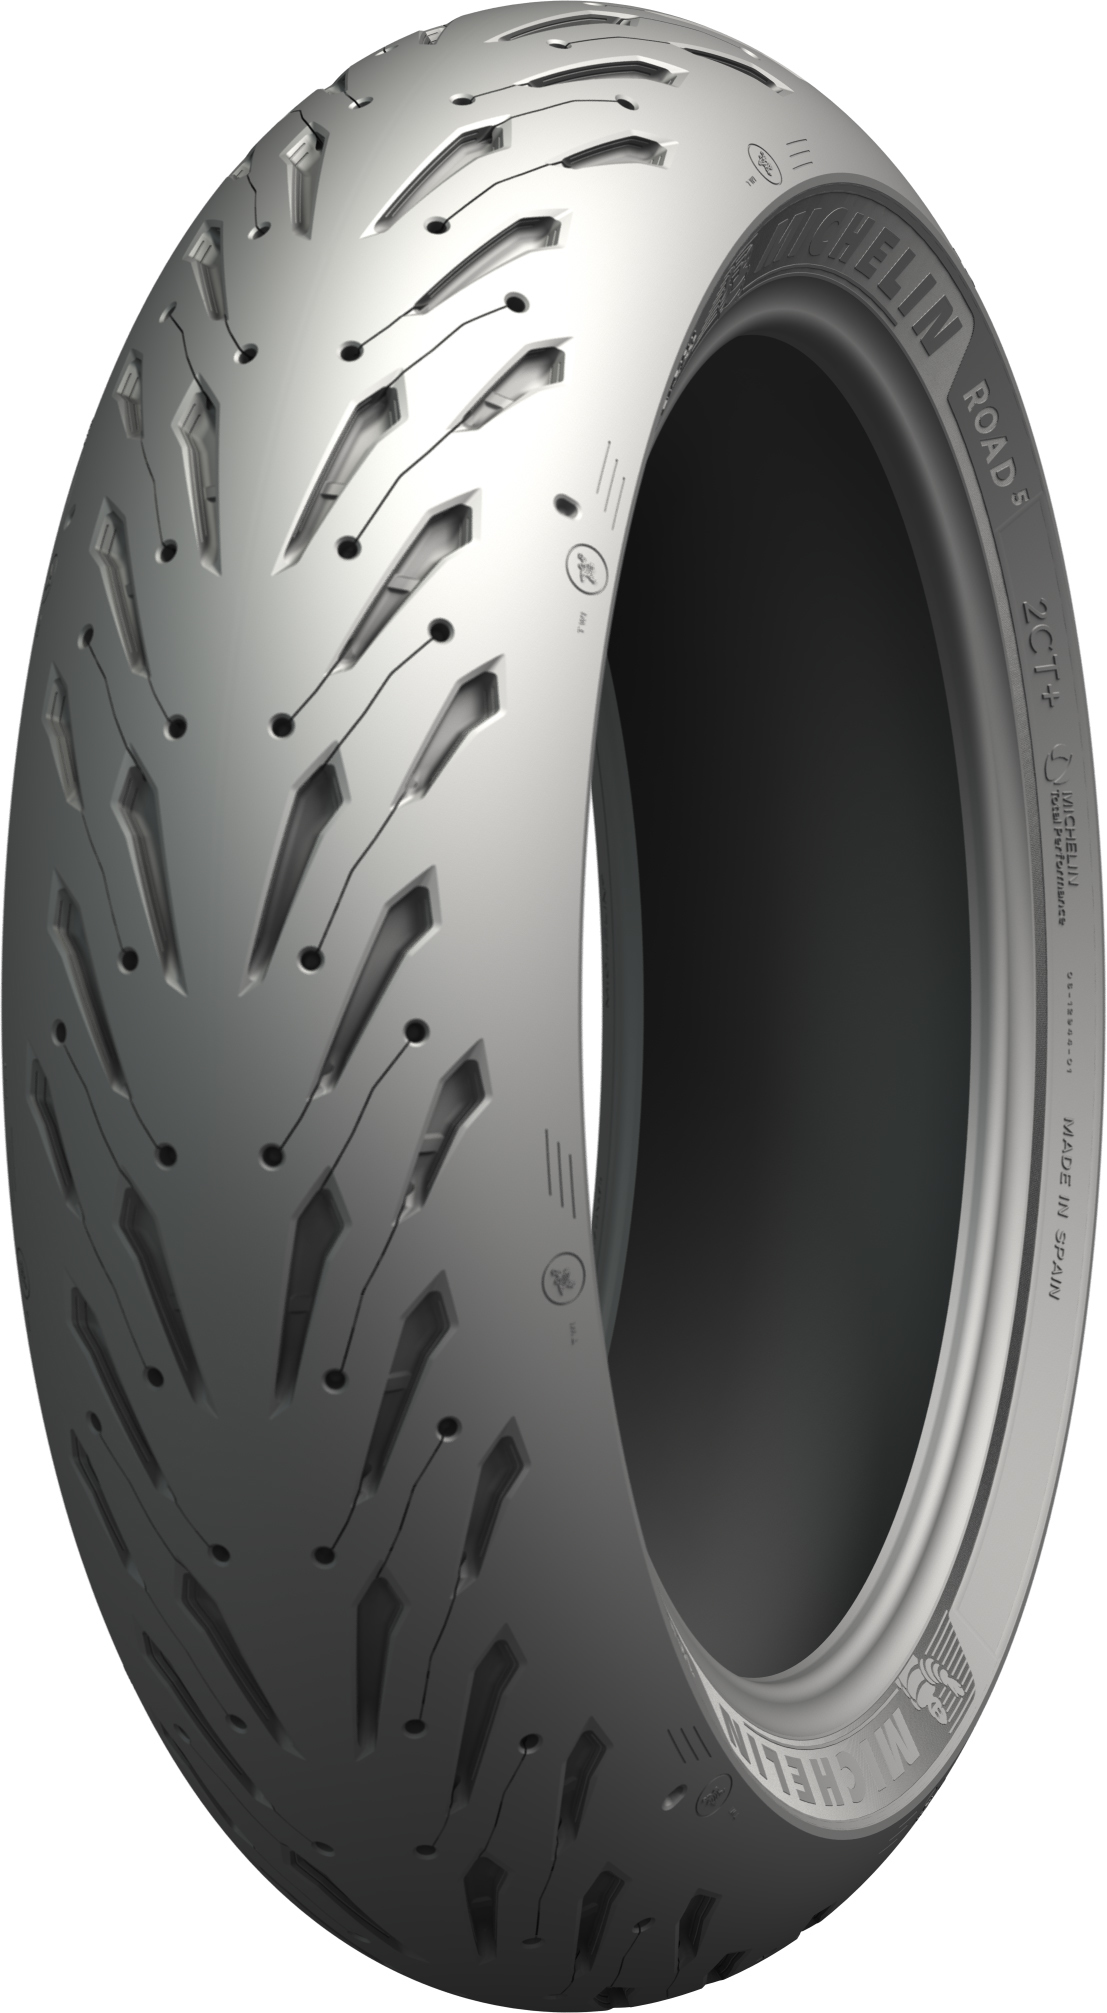 180/55ZR17 (73W) Road 5 Rear Motorcycle Tire - Click Image to Close